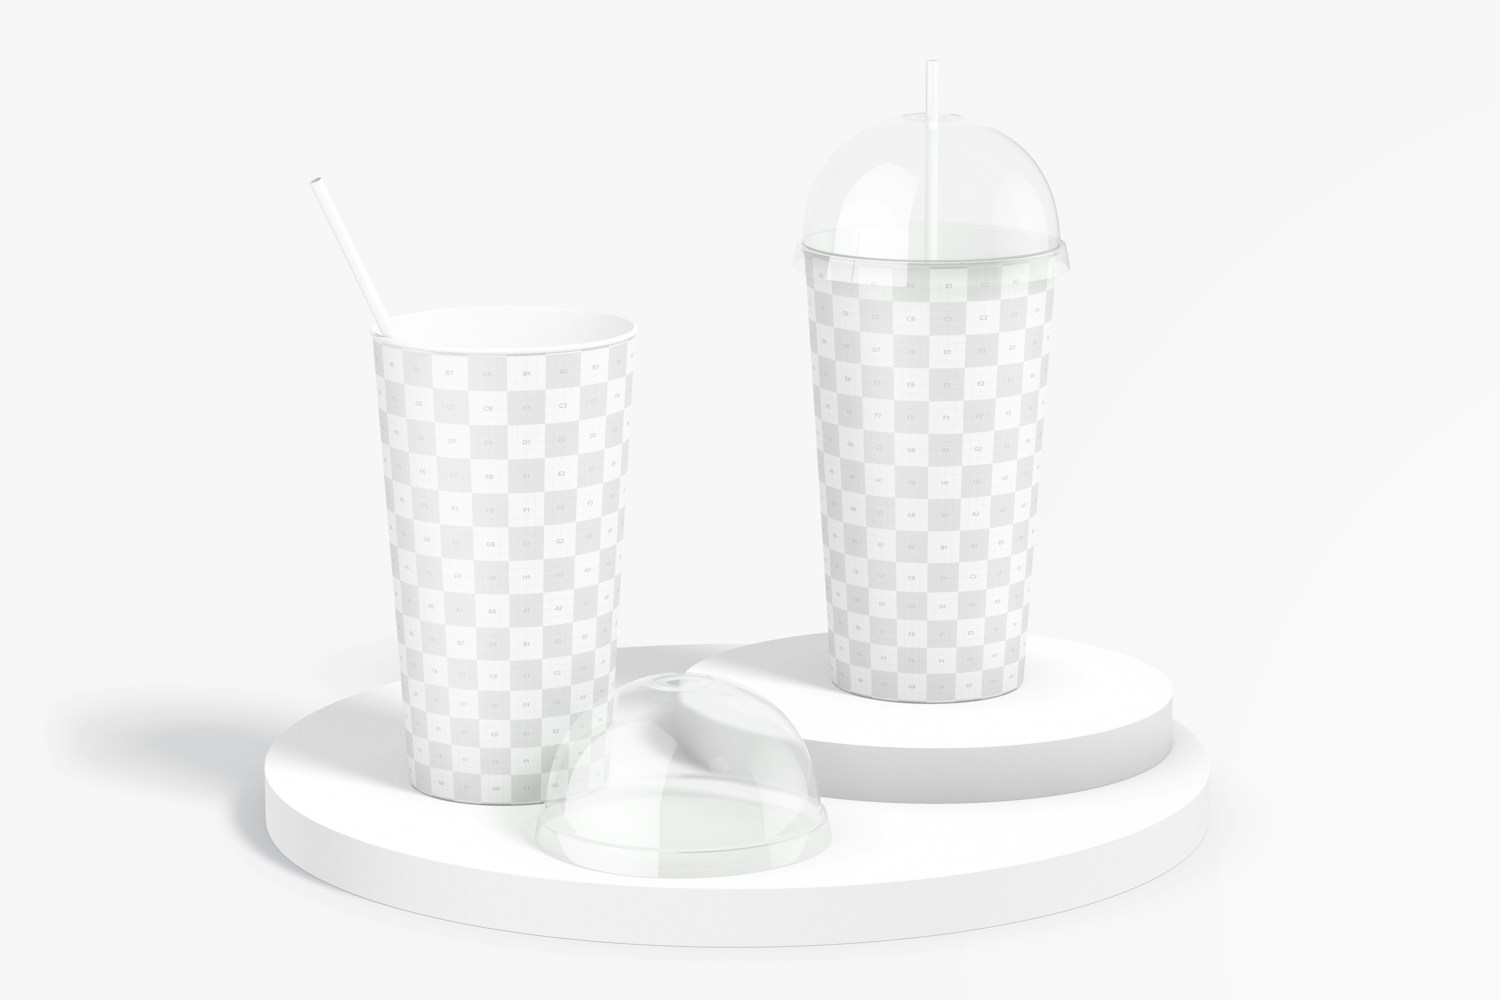 Paper Cups With Plastic Dome Lid Mockup, Opened and Closed